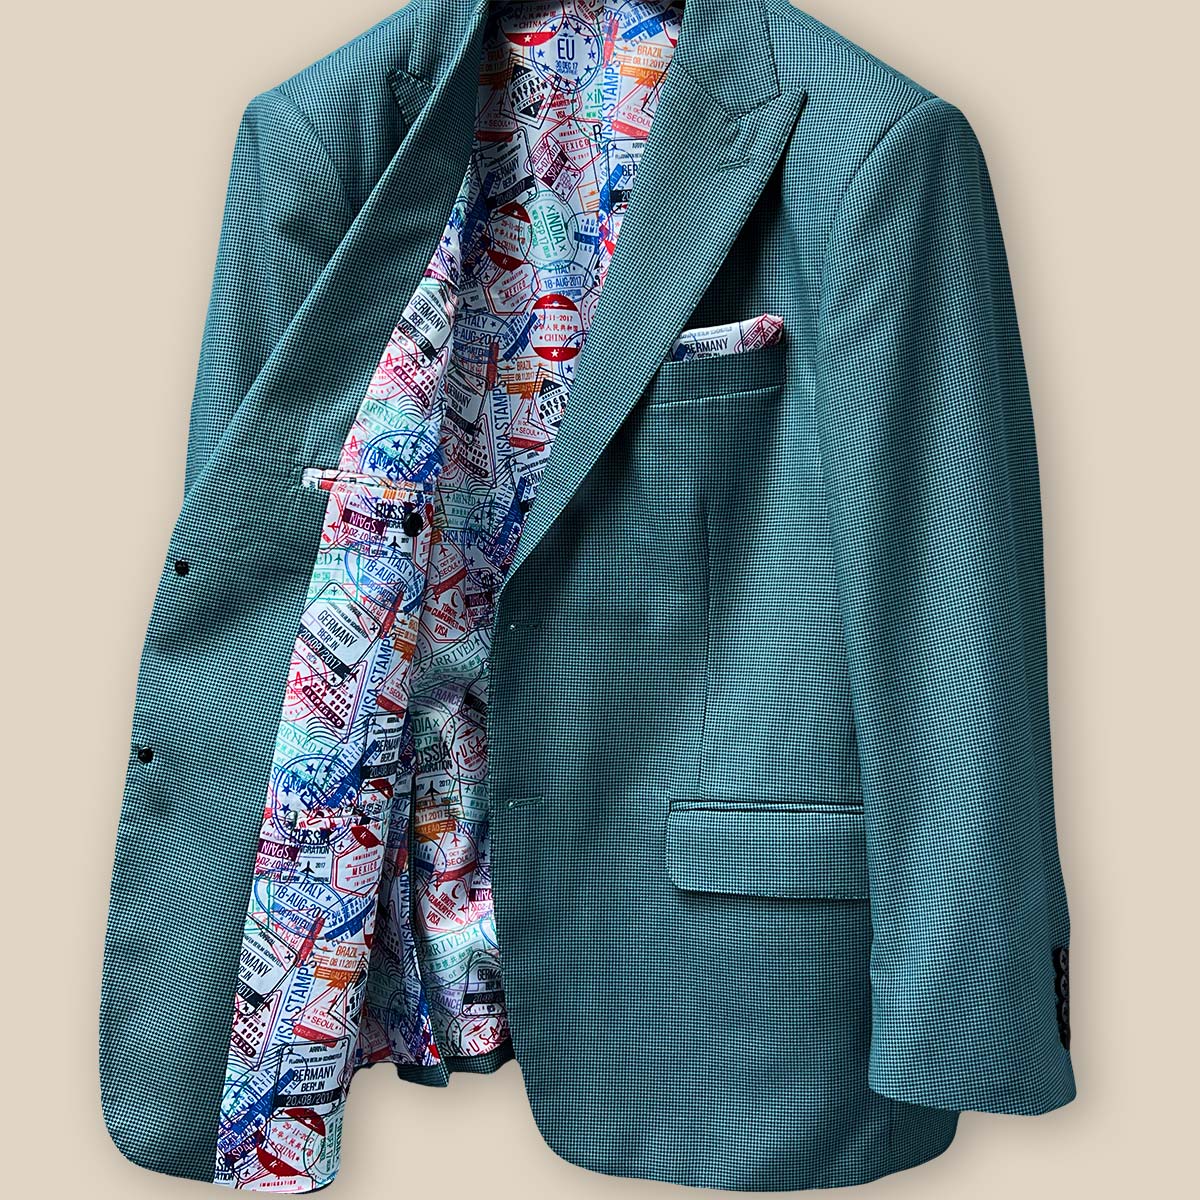 Contrast buttonholes add flair to this casual hunter green sportcoat.